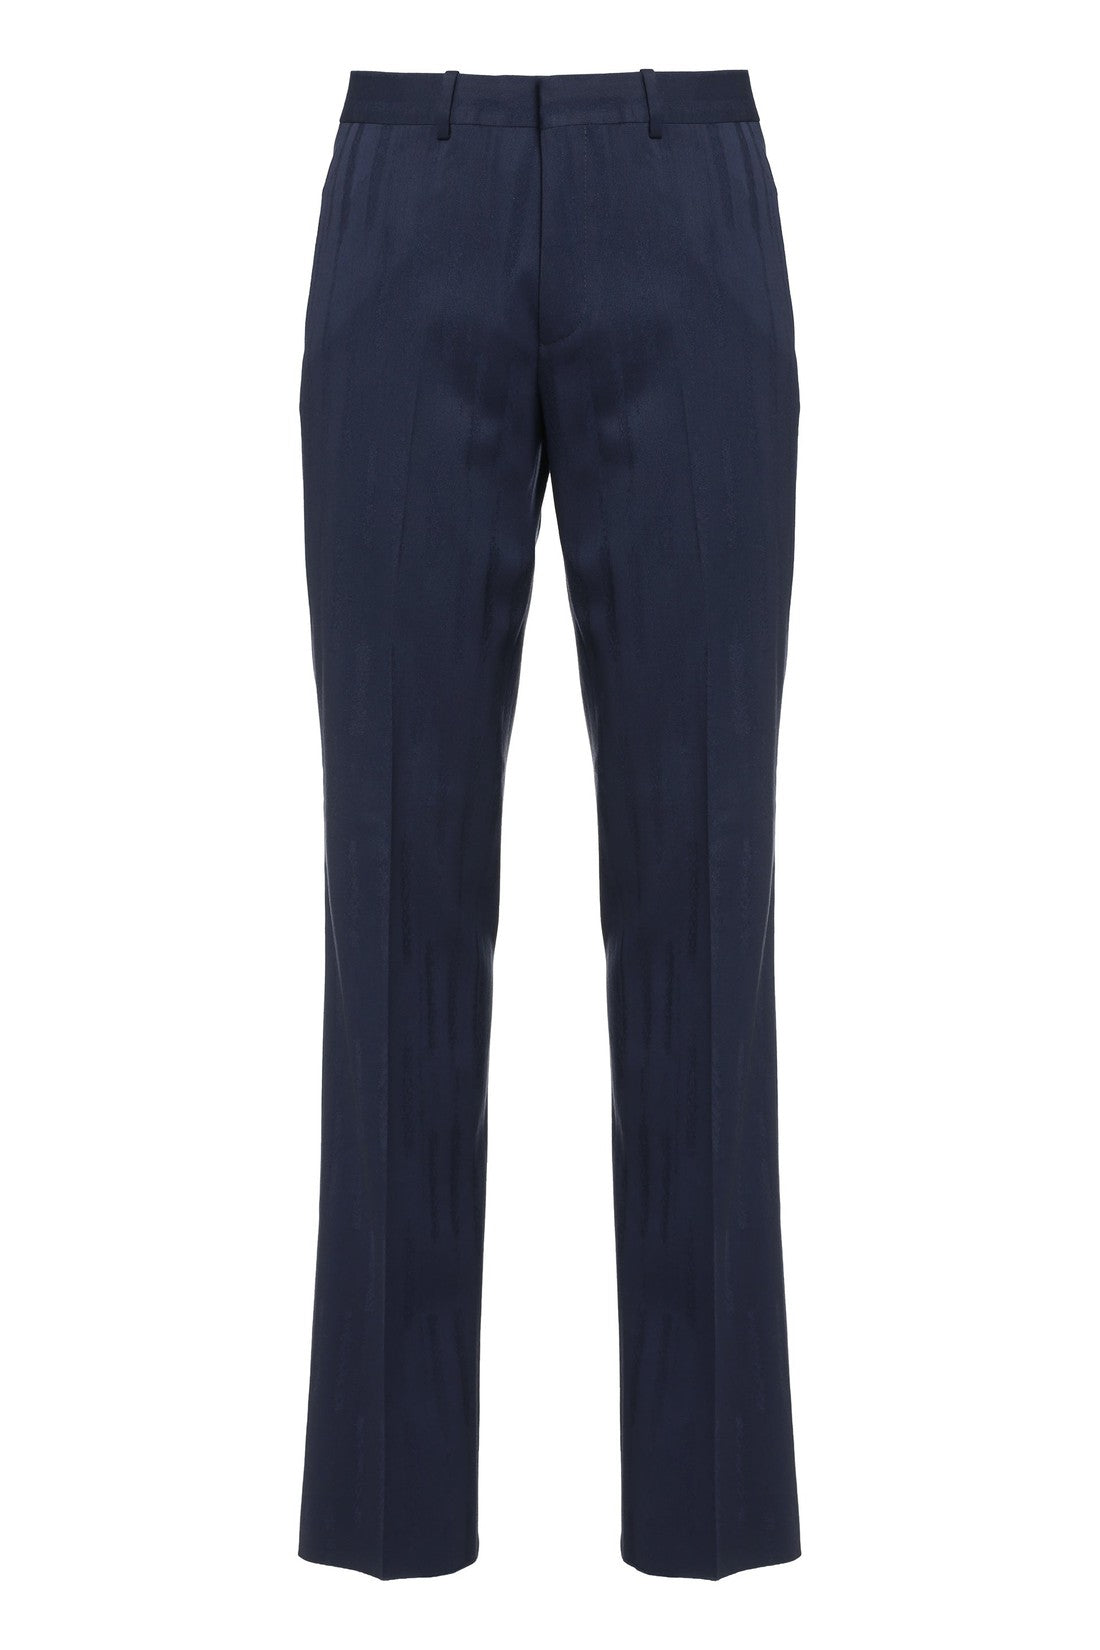 Off-White-OUTLET-SALE-Slim fit tailored trousers-ARCHIVIST